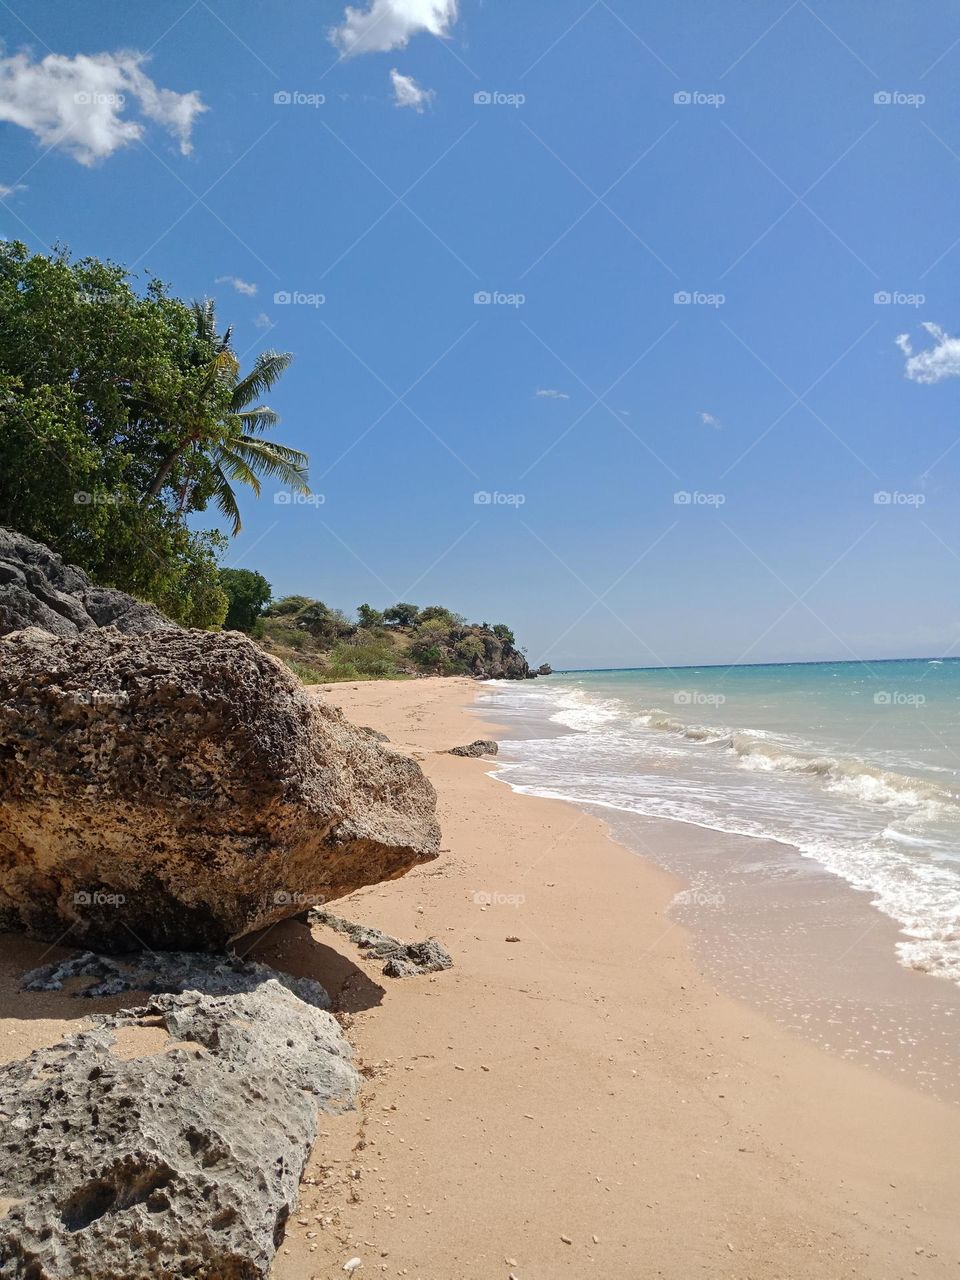 A tropical hidden beach on a sunny day, with rocks and trees